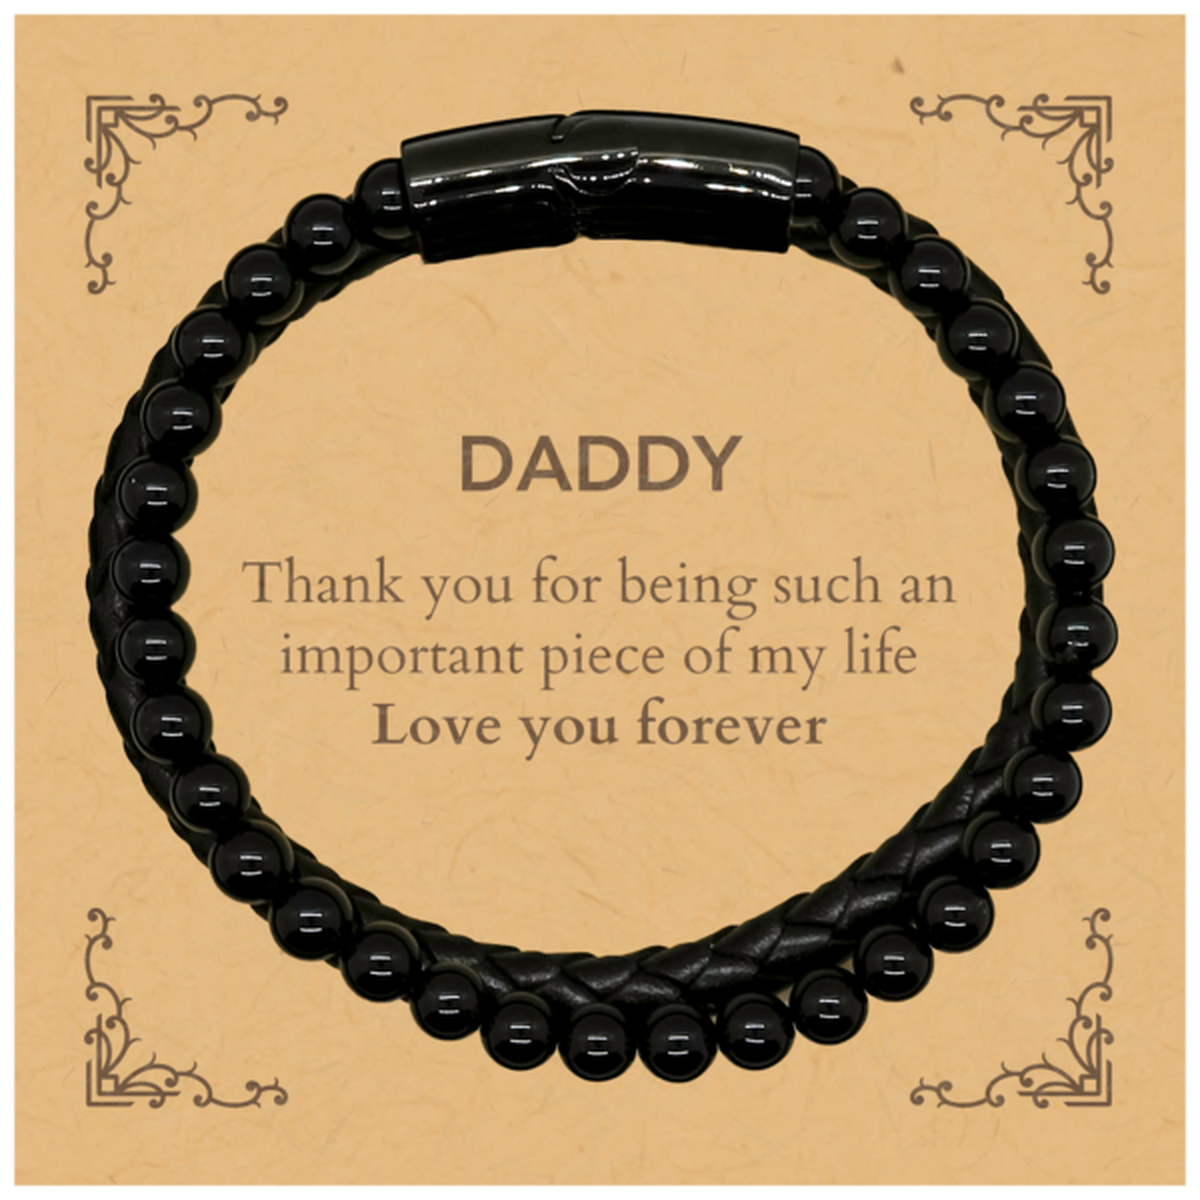 Appropriate Daddy Stone Leather Bracelets Epic Birthday Gifts for Daddy Thank you for being such an important piece of my life Daddy Christmas Mothers Fathers Day